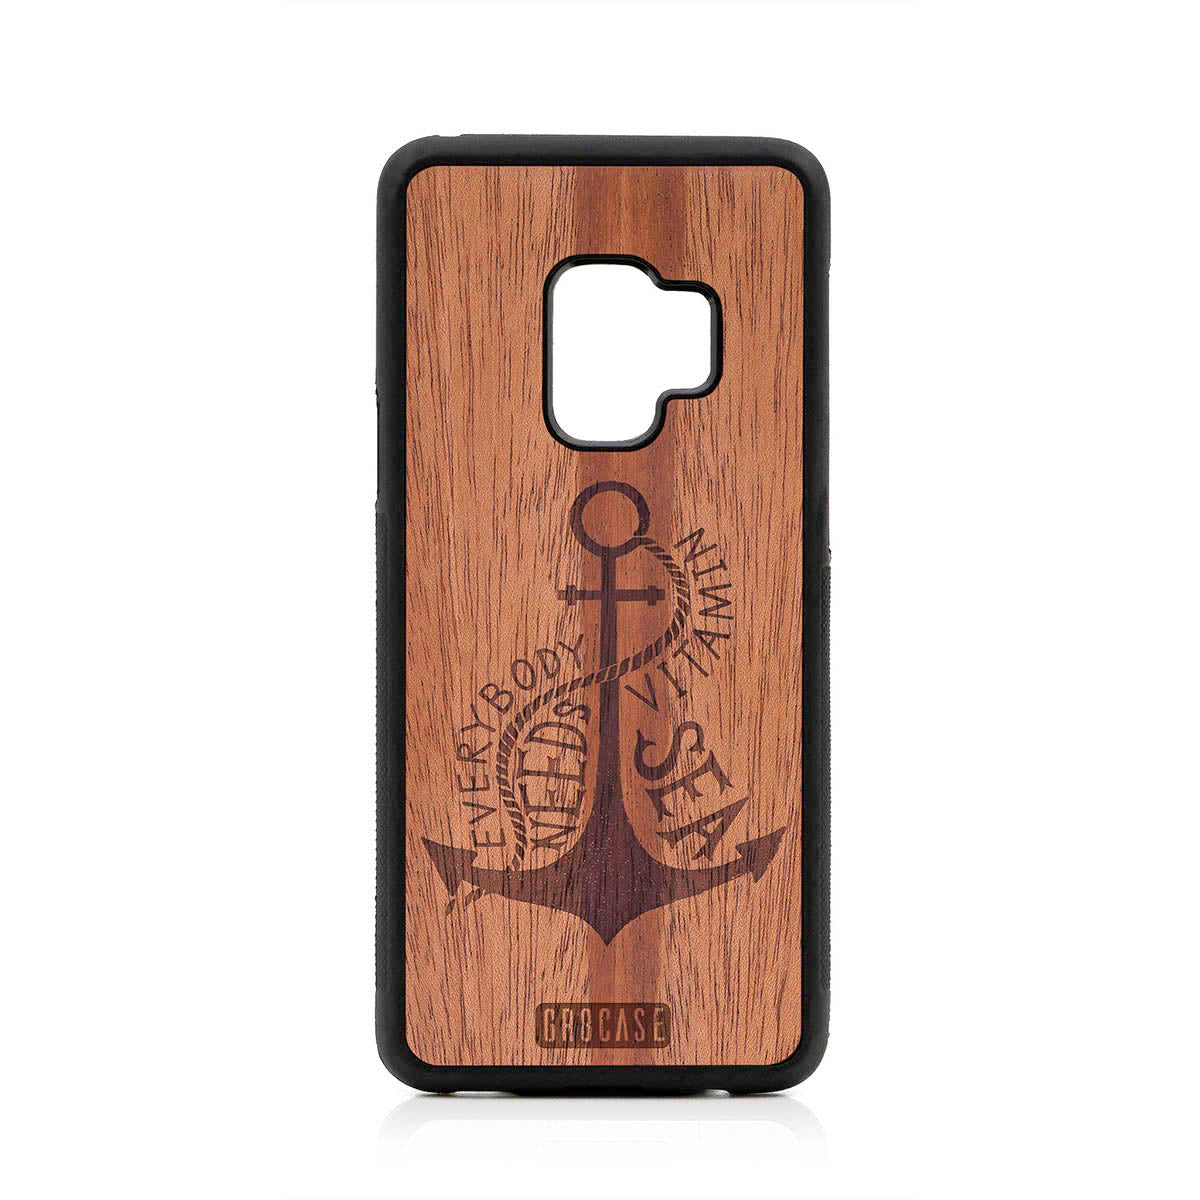 Everybody Needs Vitamin Sea (Anchor) Design Wood Case For Samsung Galaxy S9 by GR8CASE